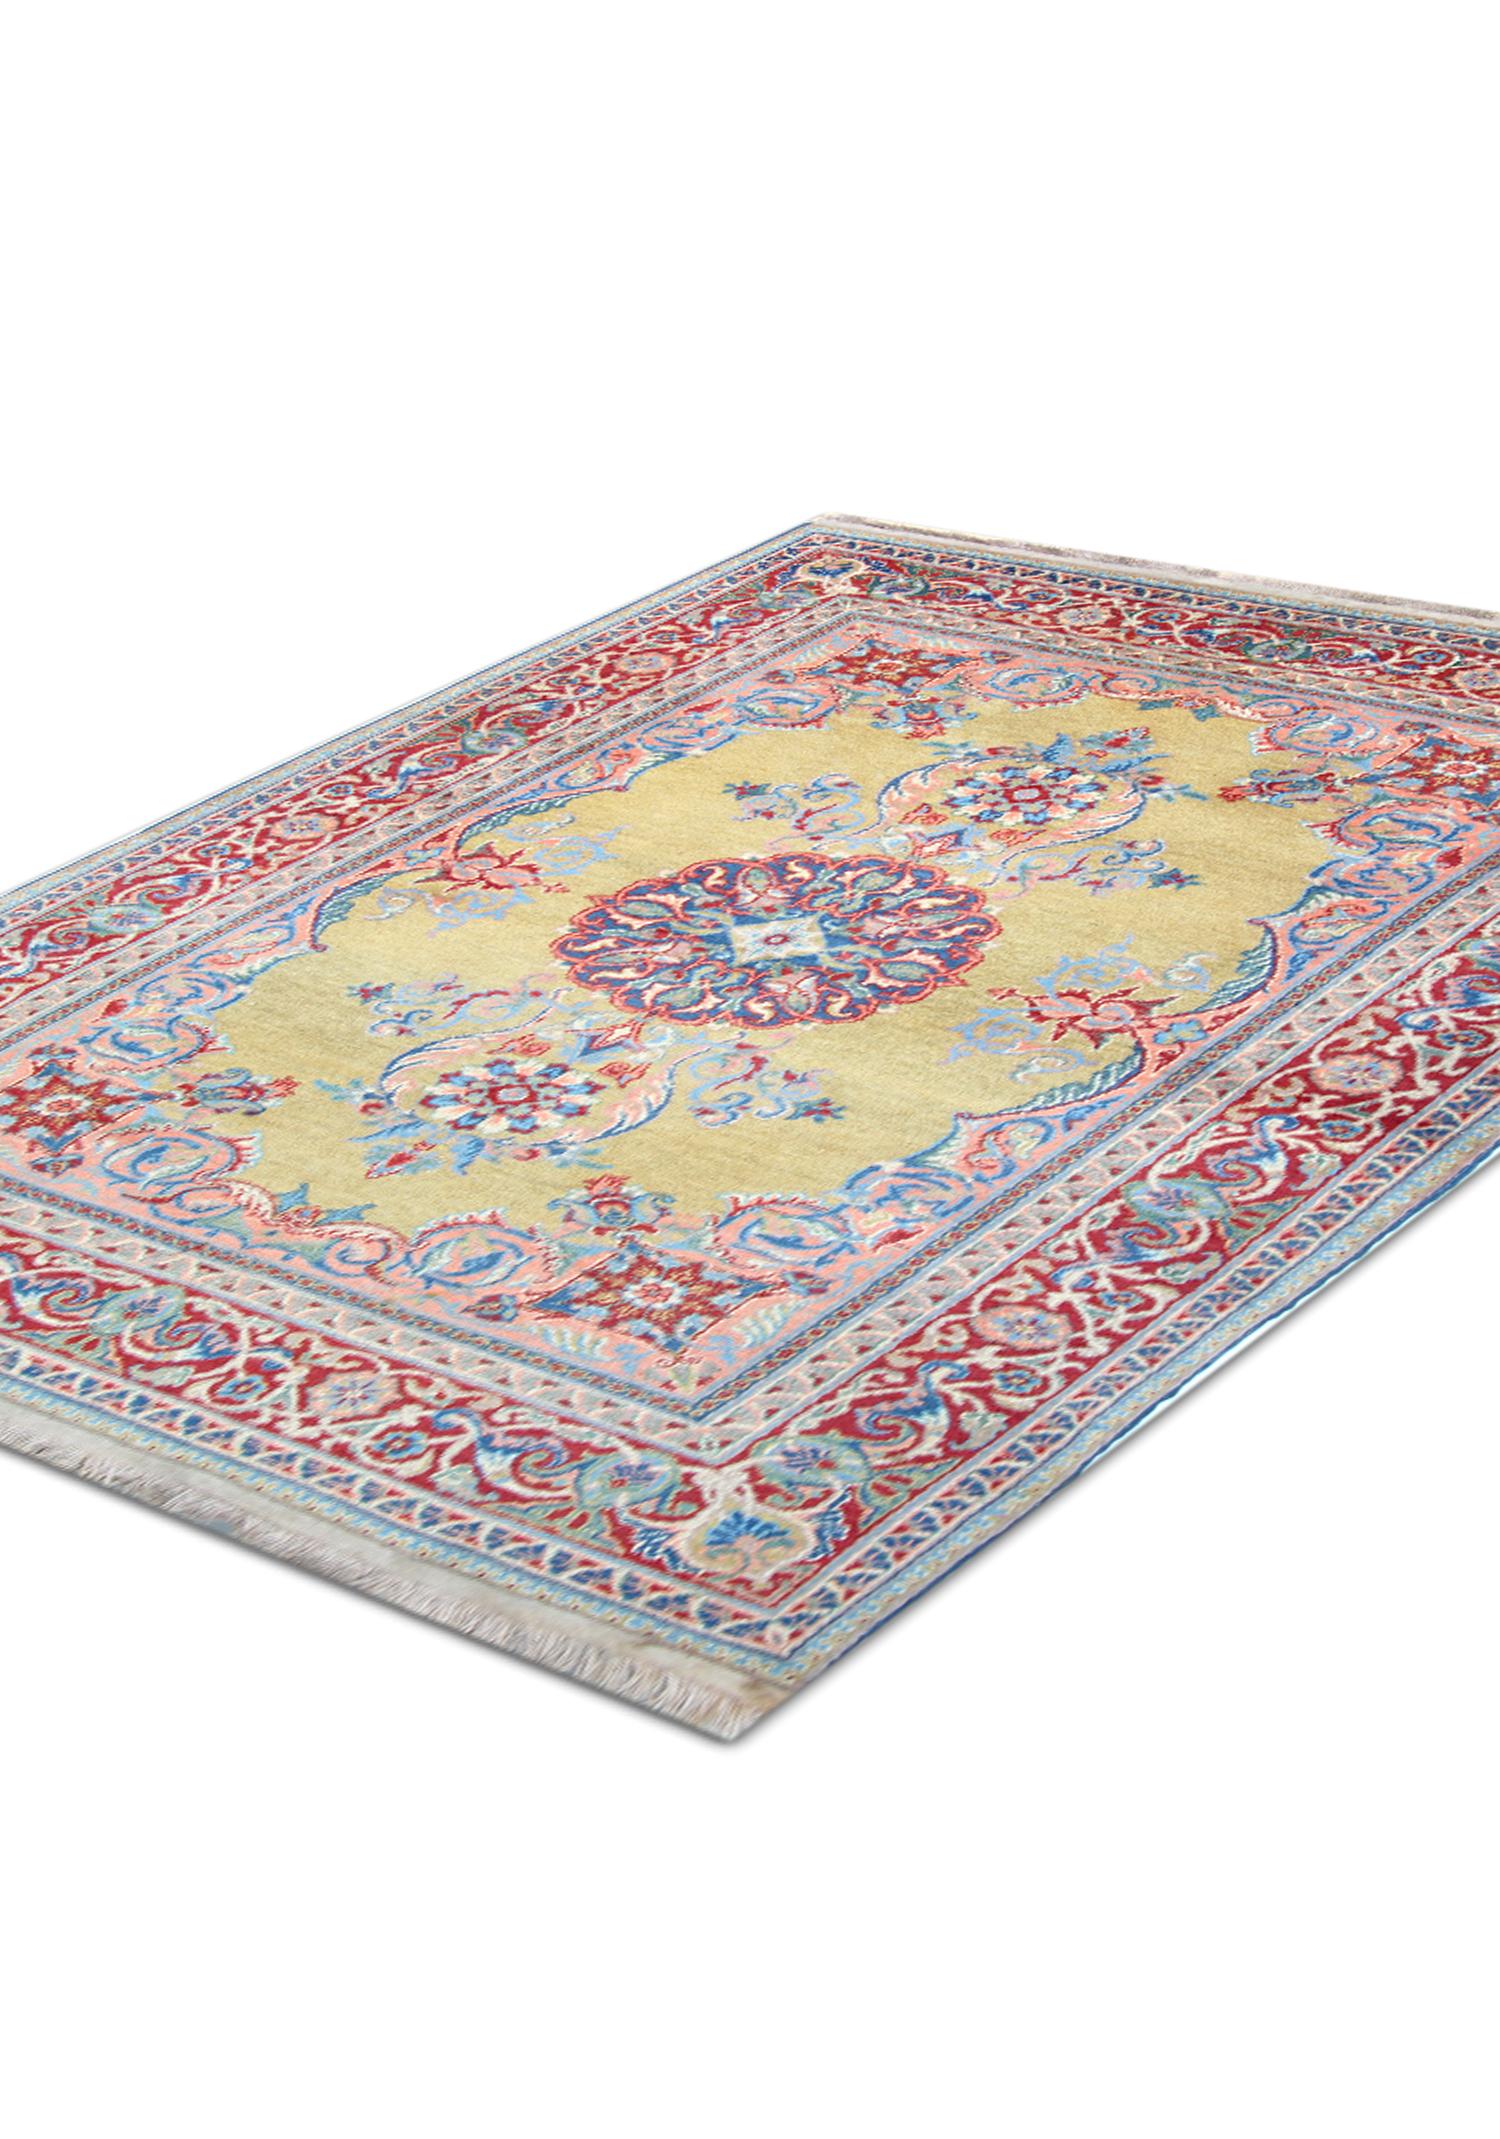 This is a fine example of an Antique rugs woven circa 1890. This wool rug is in excellent condition. Featuring a central medallion design woven on a yellow/beige field in accents of pink and blue. The stunning contrast in colour and intricately